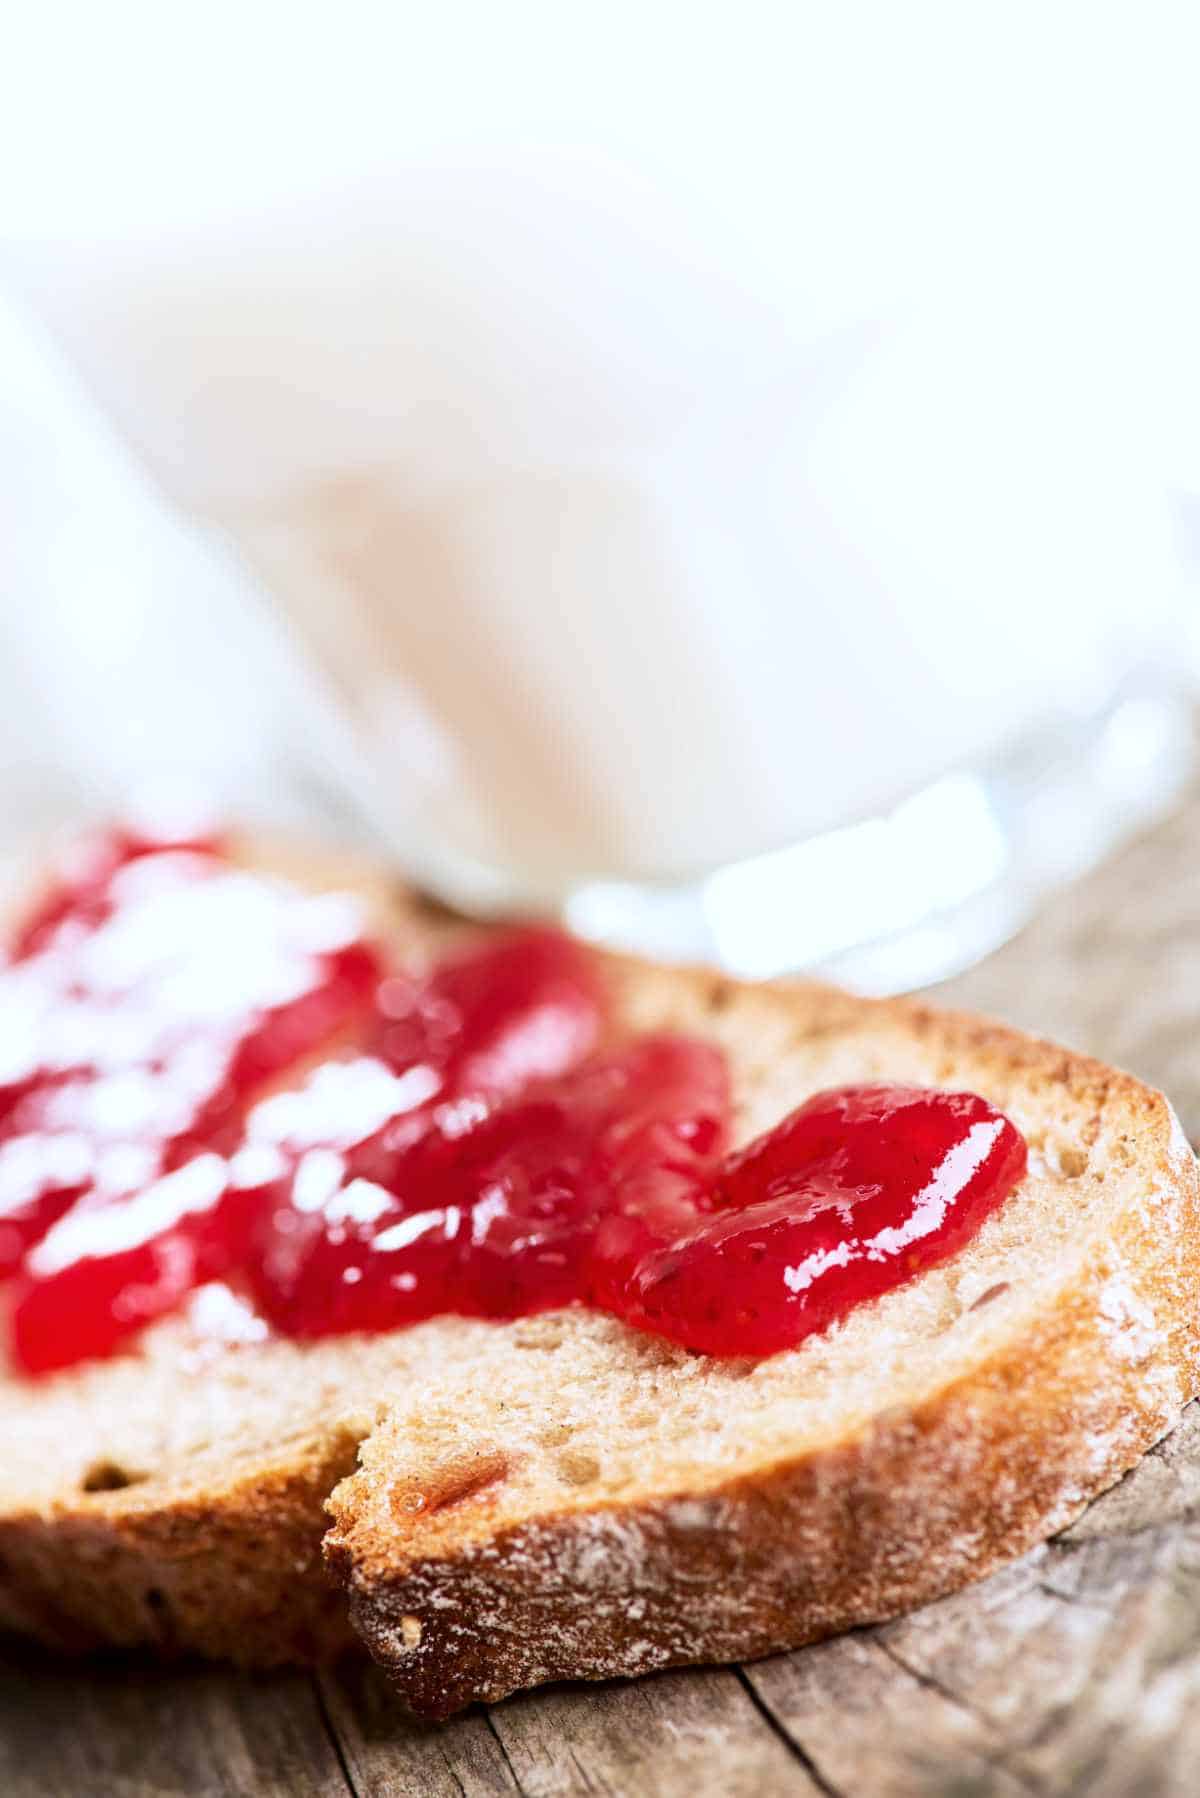 Bread with strawberry rhubarb jam and glass of milk on wooden cutting board.